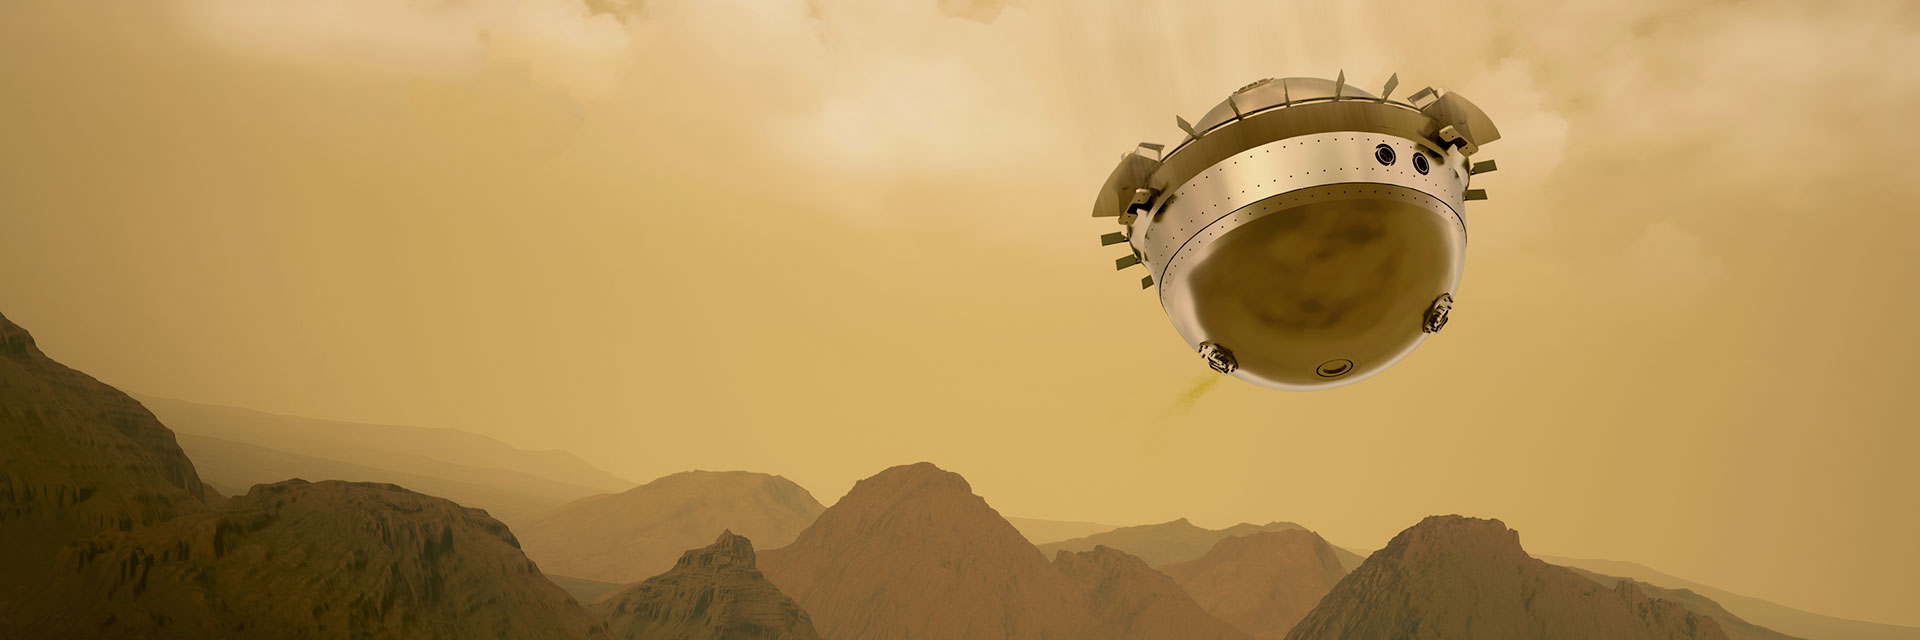 Round probe descending to Venus with hazy yellowish sky and mountains in background